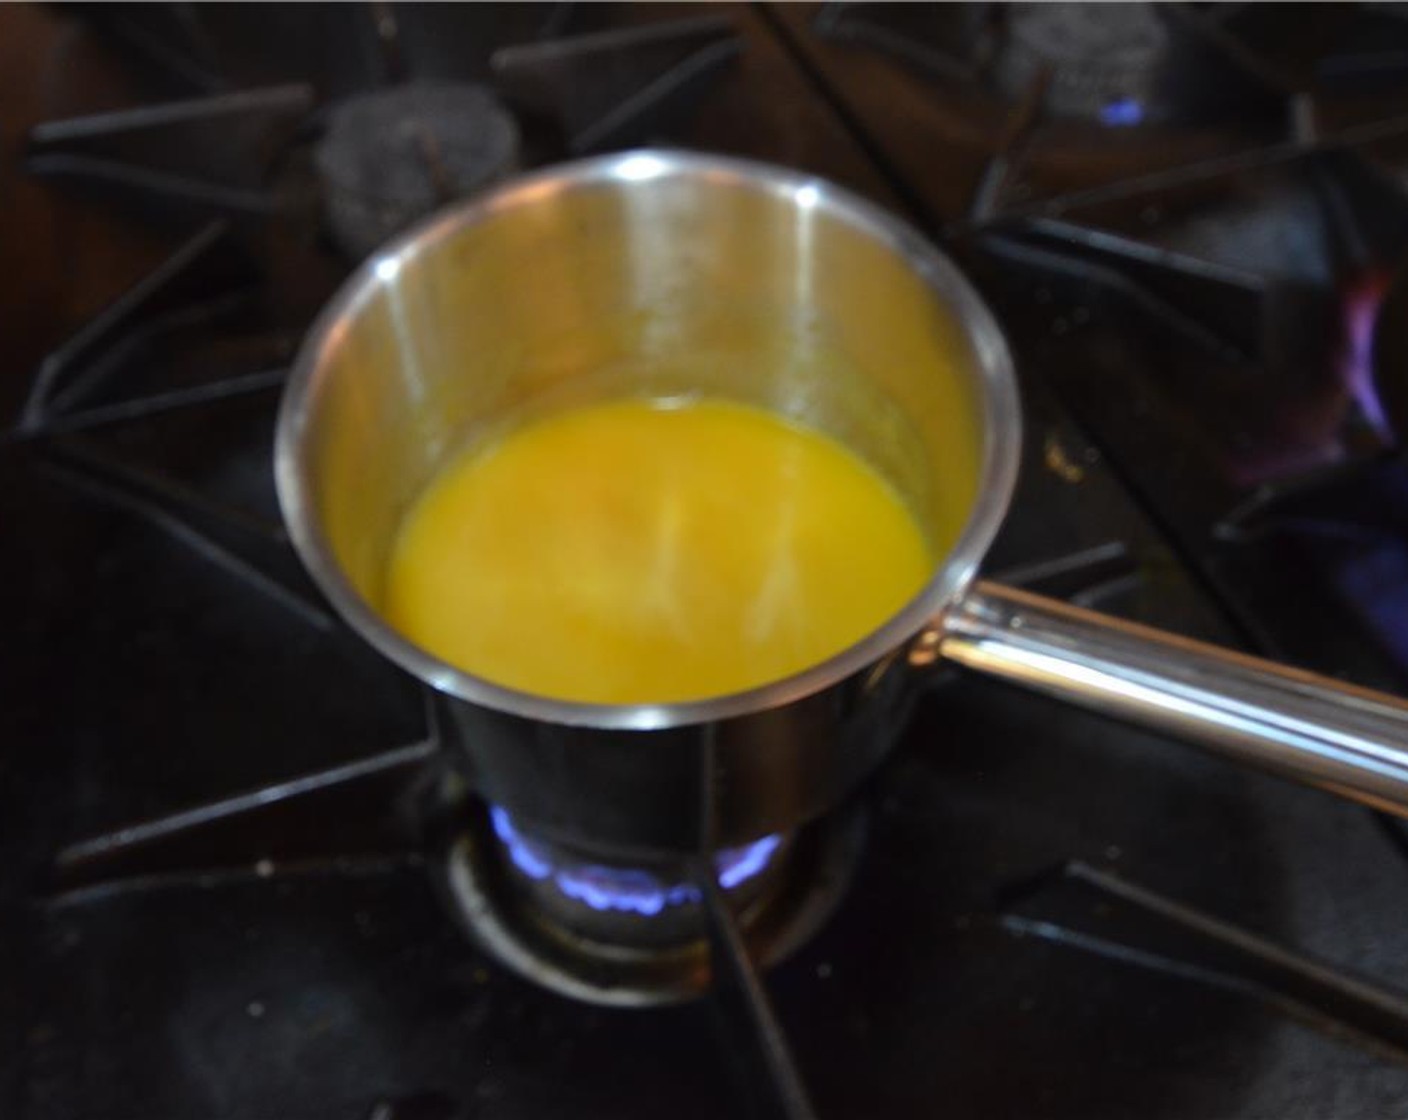 step 3 To start the risotto, combine Vegetable Stock (4 oz), Fresh Apple Juice (1 cup), and Fresh Pumpkin Juice (1 cup) in a small saucepan and hold warm at 90 degrees C (195 degrees C).